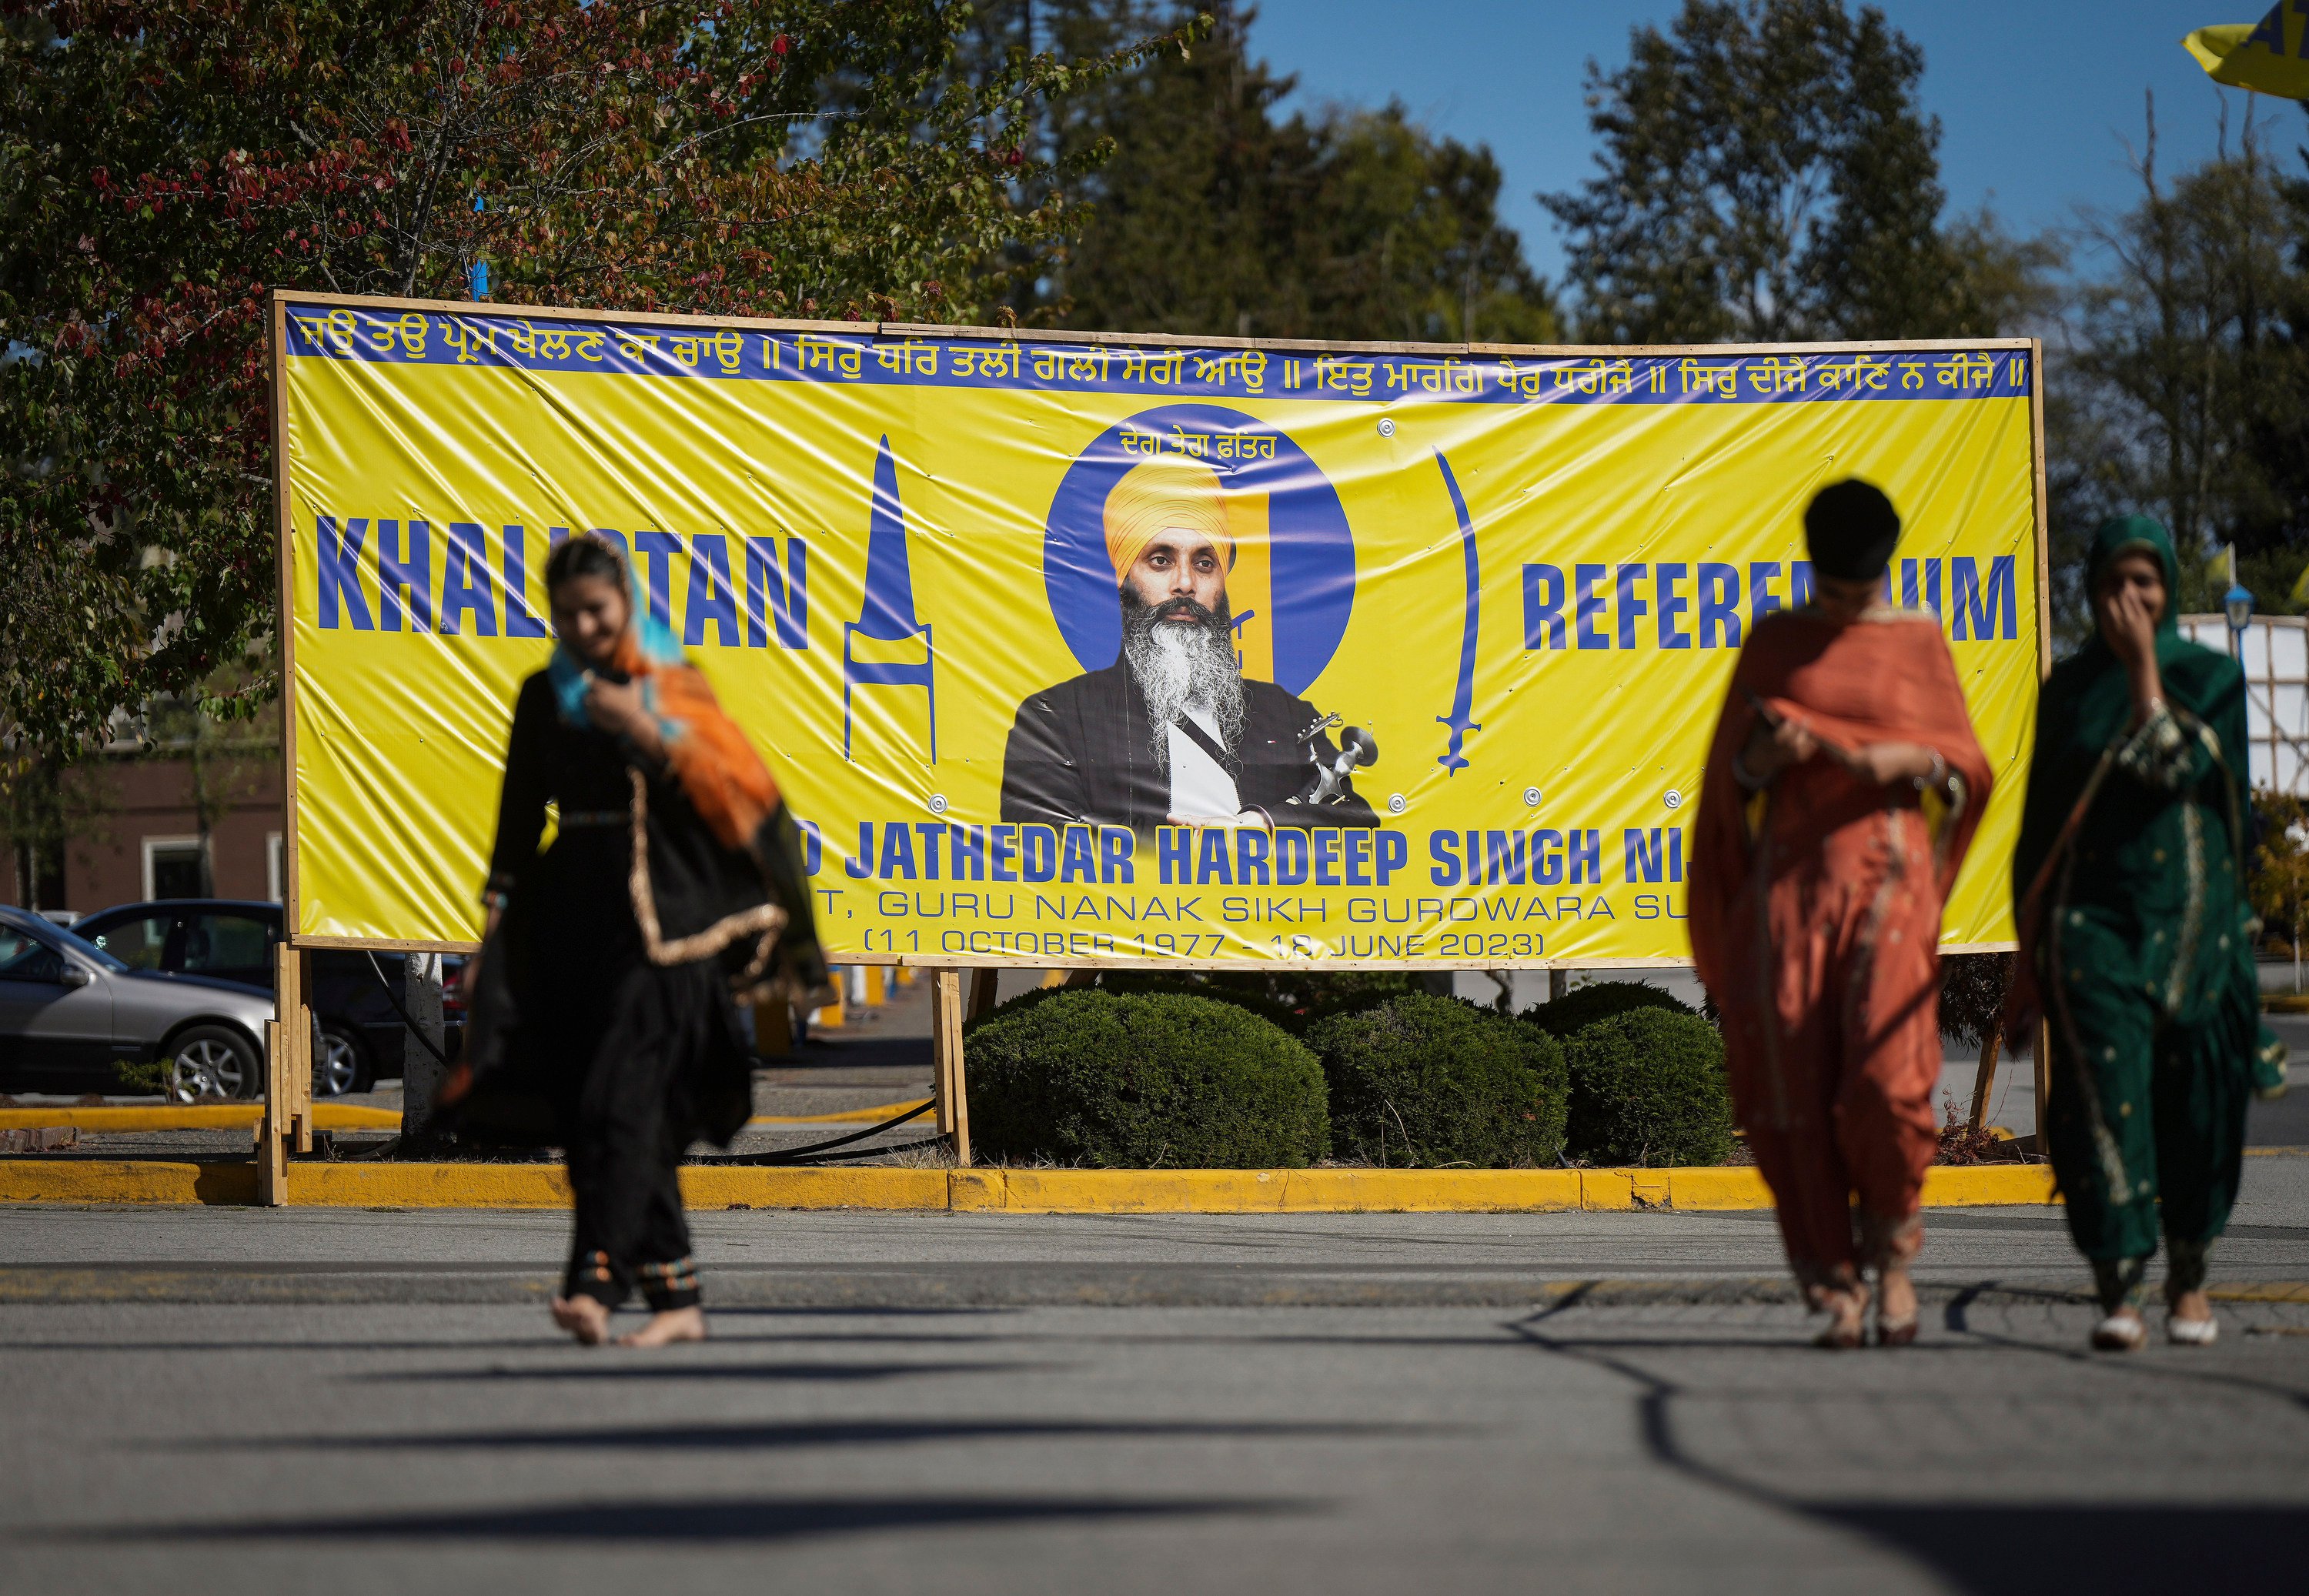 FILE - A photograph of late temple president Hardeep Singh Nijjar is seen on a banner outside the Guru Nanak Sikh Gurdwara Sahib in Surrey, British Columbia, on Sept. 18, 2023, where temple president Hardeep Singh Nijjar was gunned down in his vehicle while leaving the temple parking lot in June. Indian and Canadian officials have been in contact “at various levels” following a confrontation over Canadian accusations that India may have been involved in the killing of a Sikh separatist leader in suburban Vancouver, an official in New Delhi said Thursday Oct. 12, 2023. (Darryl Dyck/The Canadian Press via AP, File)